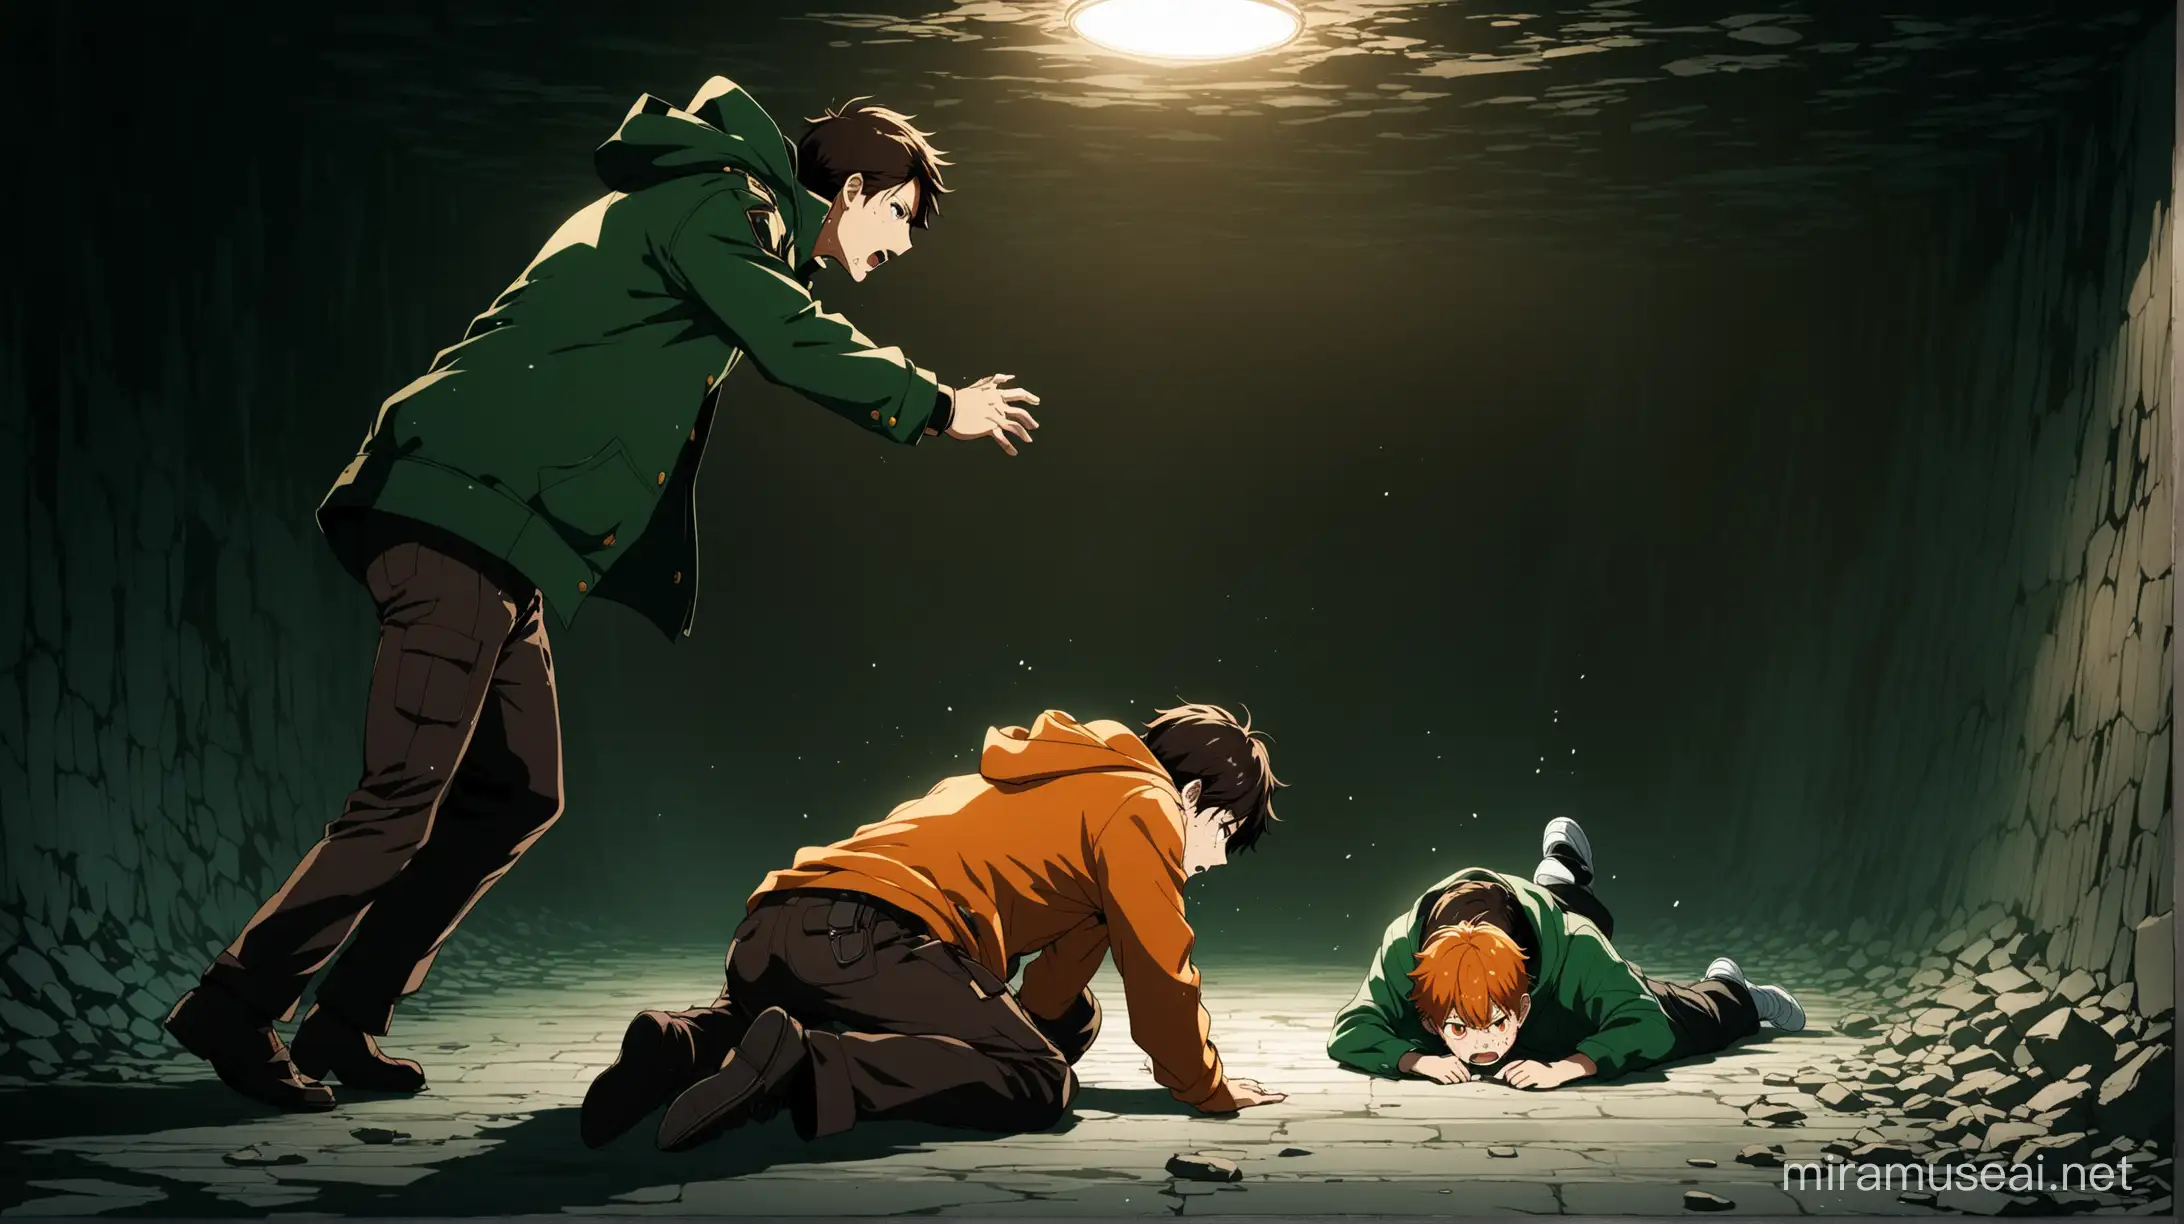 A side view image of of two anime characters in which there is a boy teenager who is handcuffed, crying, screaming and running towards his dad who is injured badly and sitting on the floor unconsciously. The boy is teenager, crying, orange headed, orange eyes, wearing dark green hoodie, handsome and running towards his unconscious father sitting on the floor of an underground secret room with dark green contrasts and vibe. His father is unconscious, injured, detective, dark brown headed, orange eyes, wearing detective clothes with dark brown and skin contrast. 